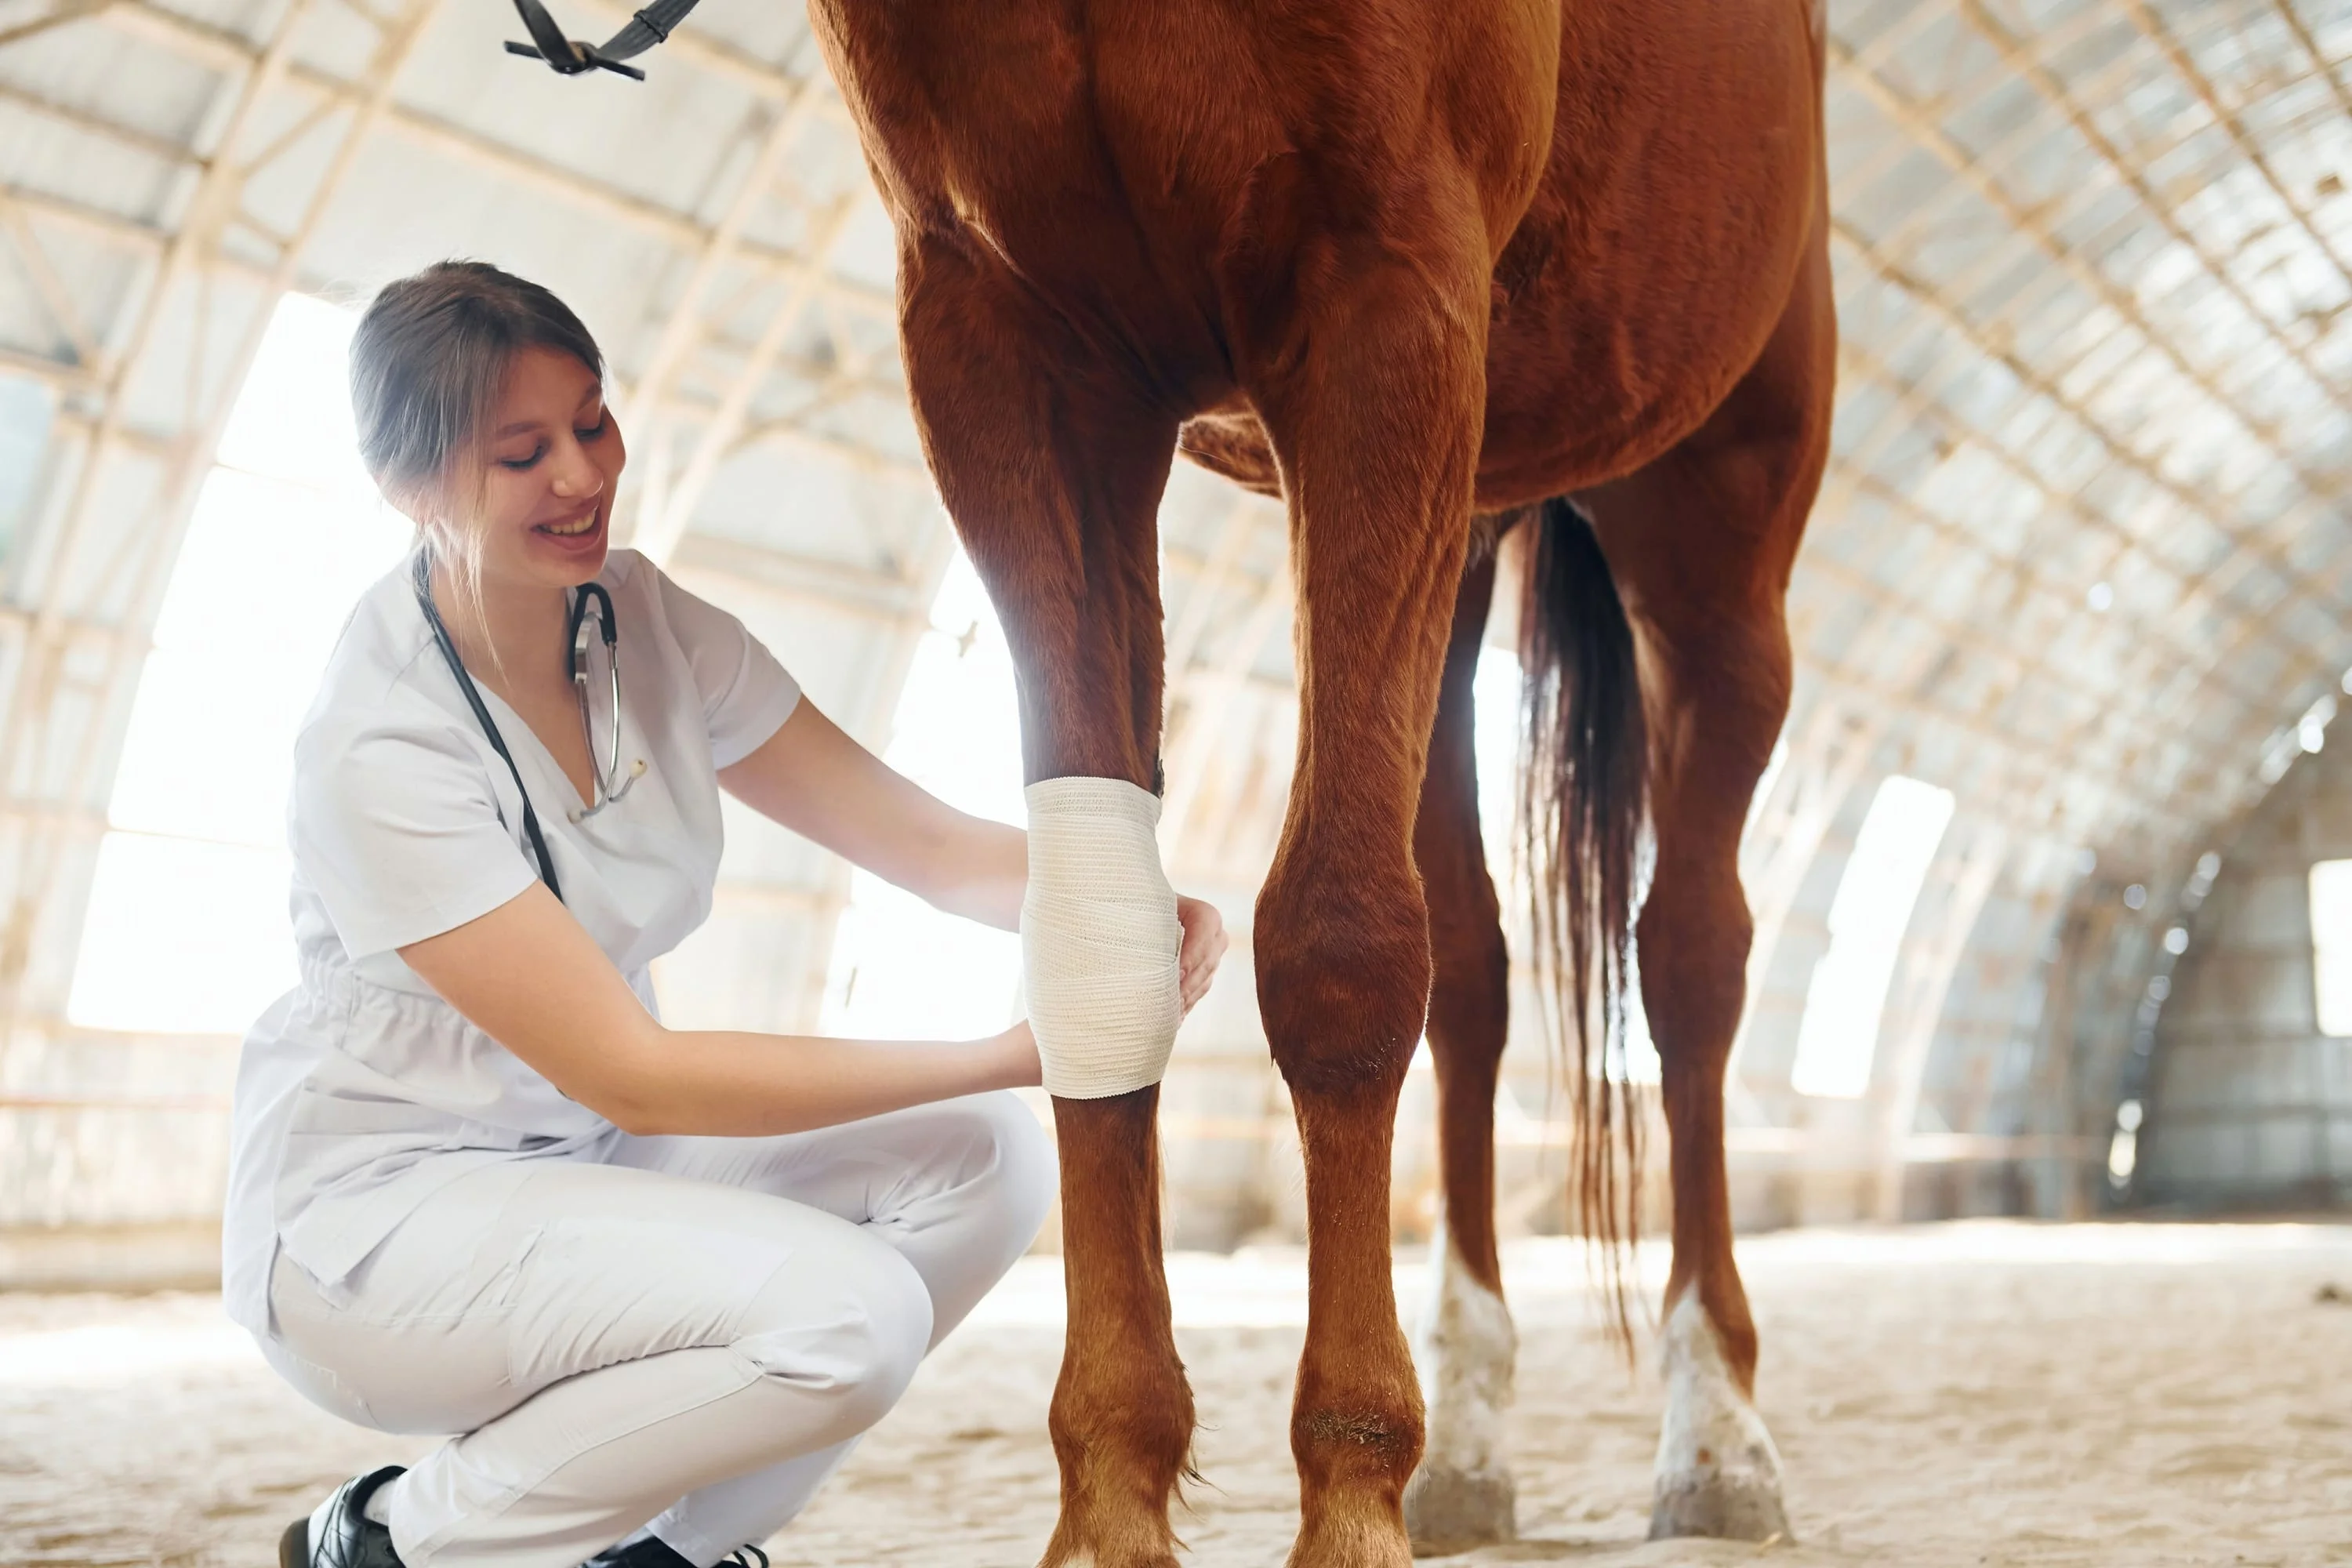 Services We Offer at Backstretch Veterinary